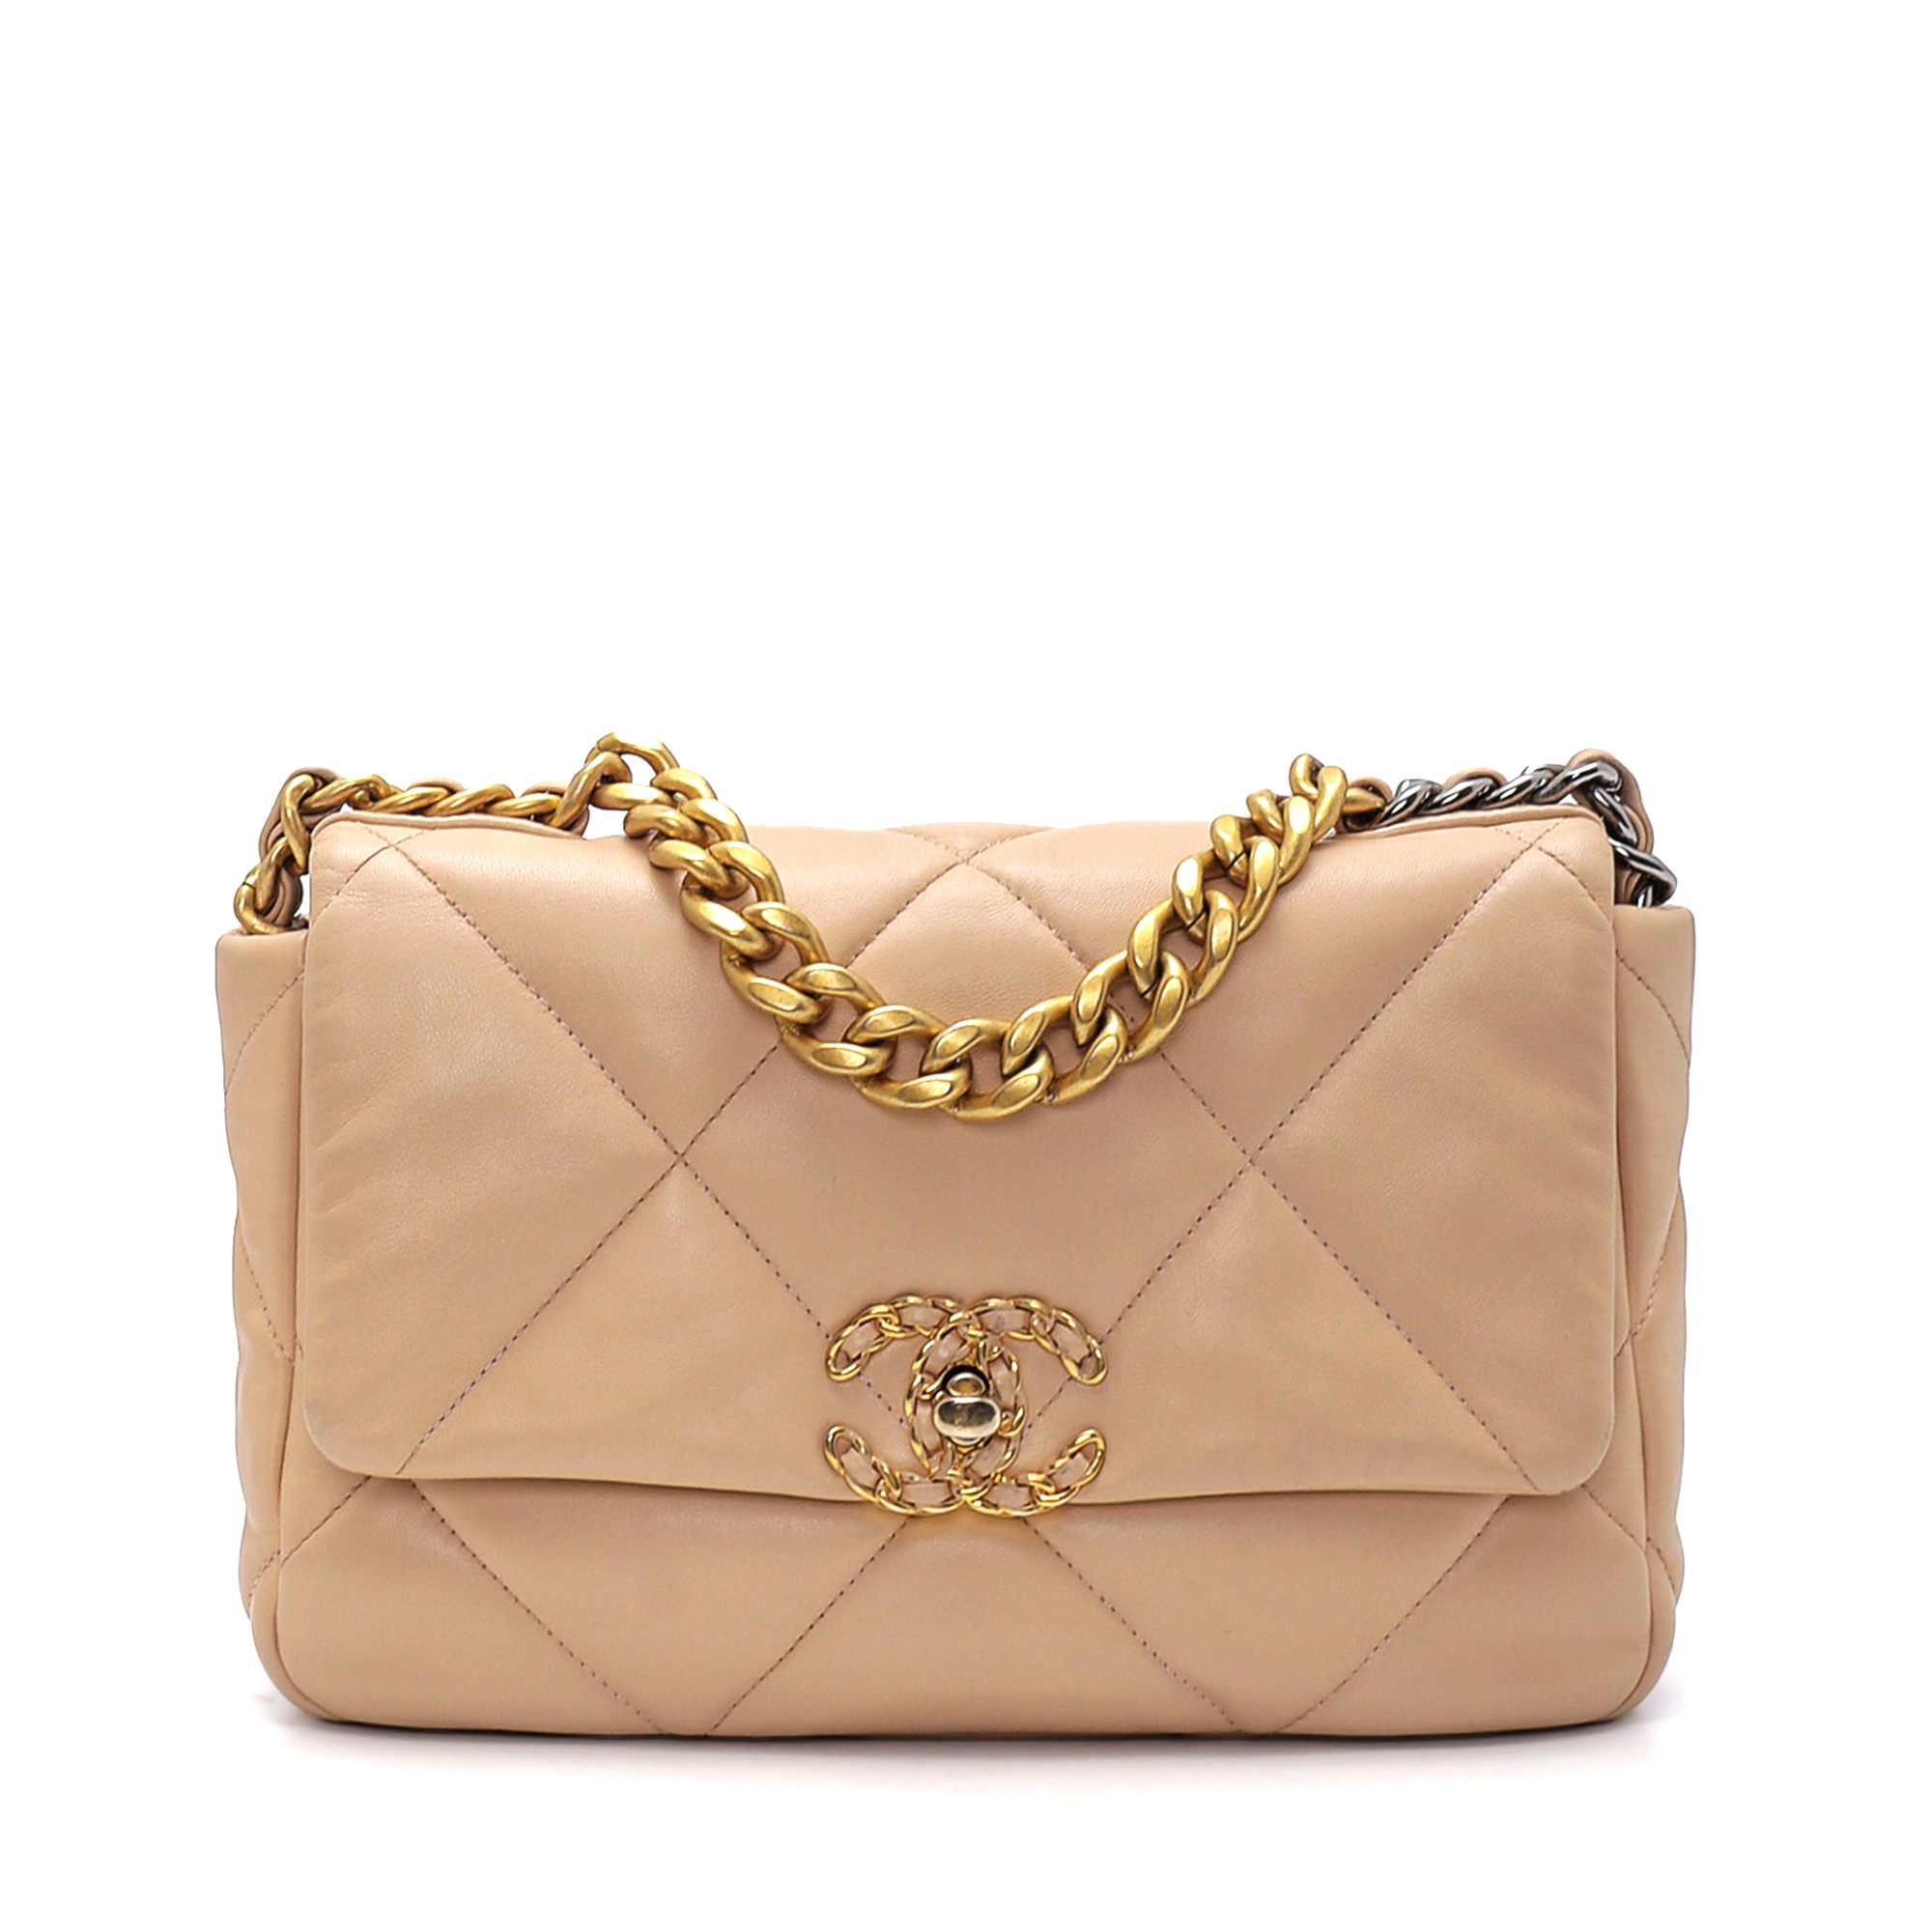 Chanel - Beige Quilted Lambskin Leather Medium No19 Bag